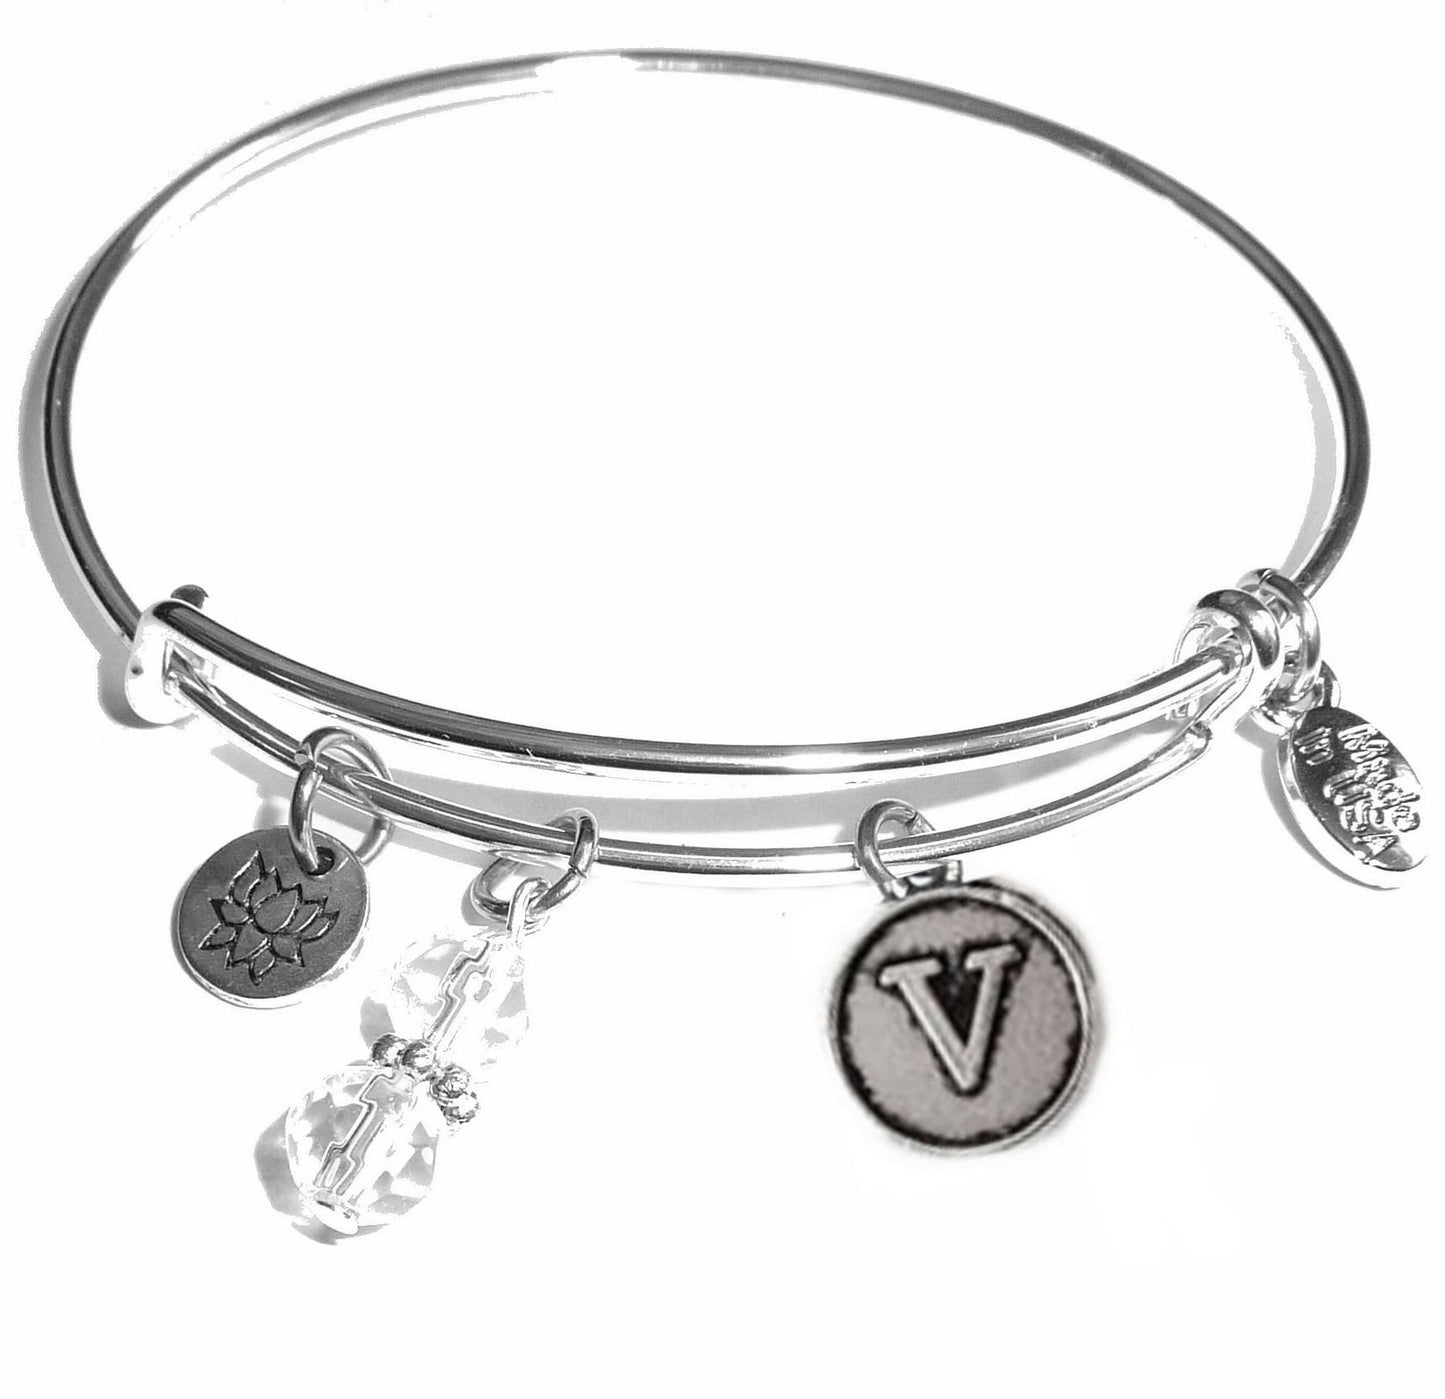 V - Initial Bangle Bracelet -Expandable Wire Bracelet– Comes in a gift box